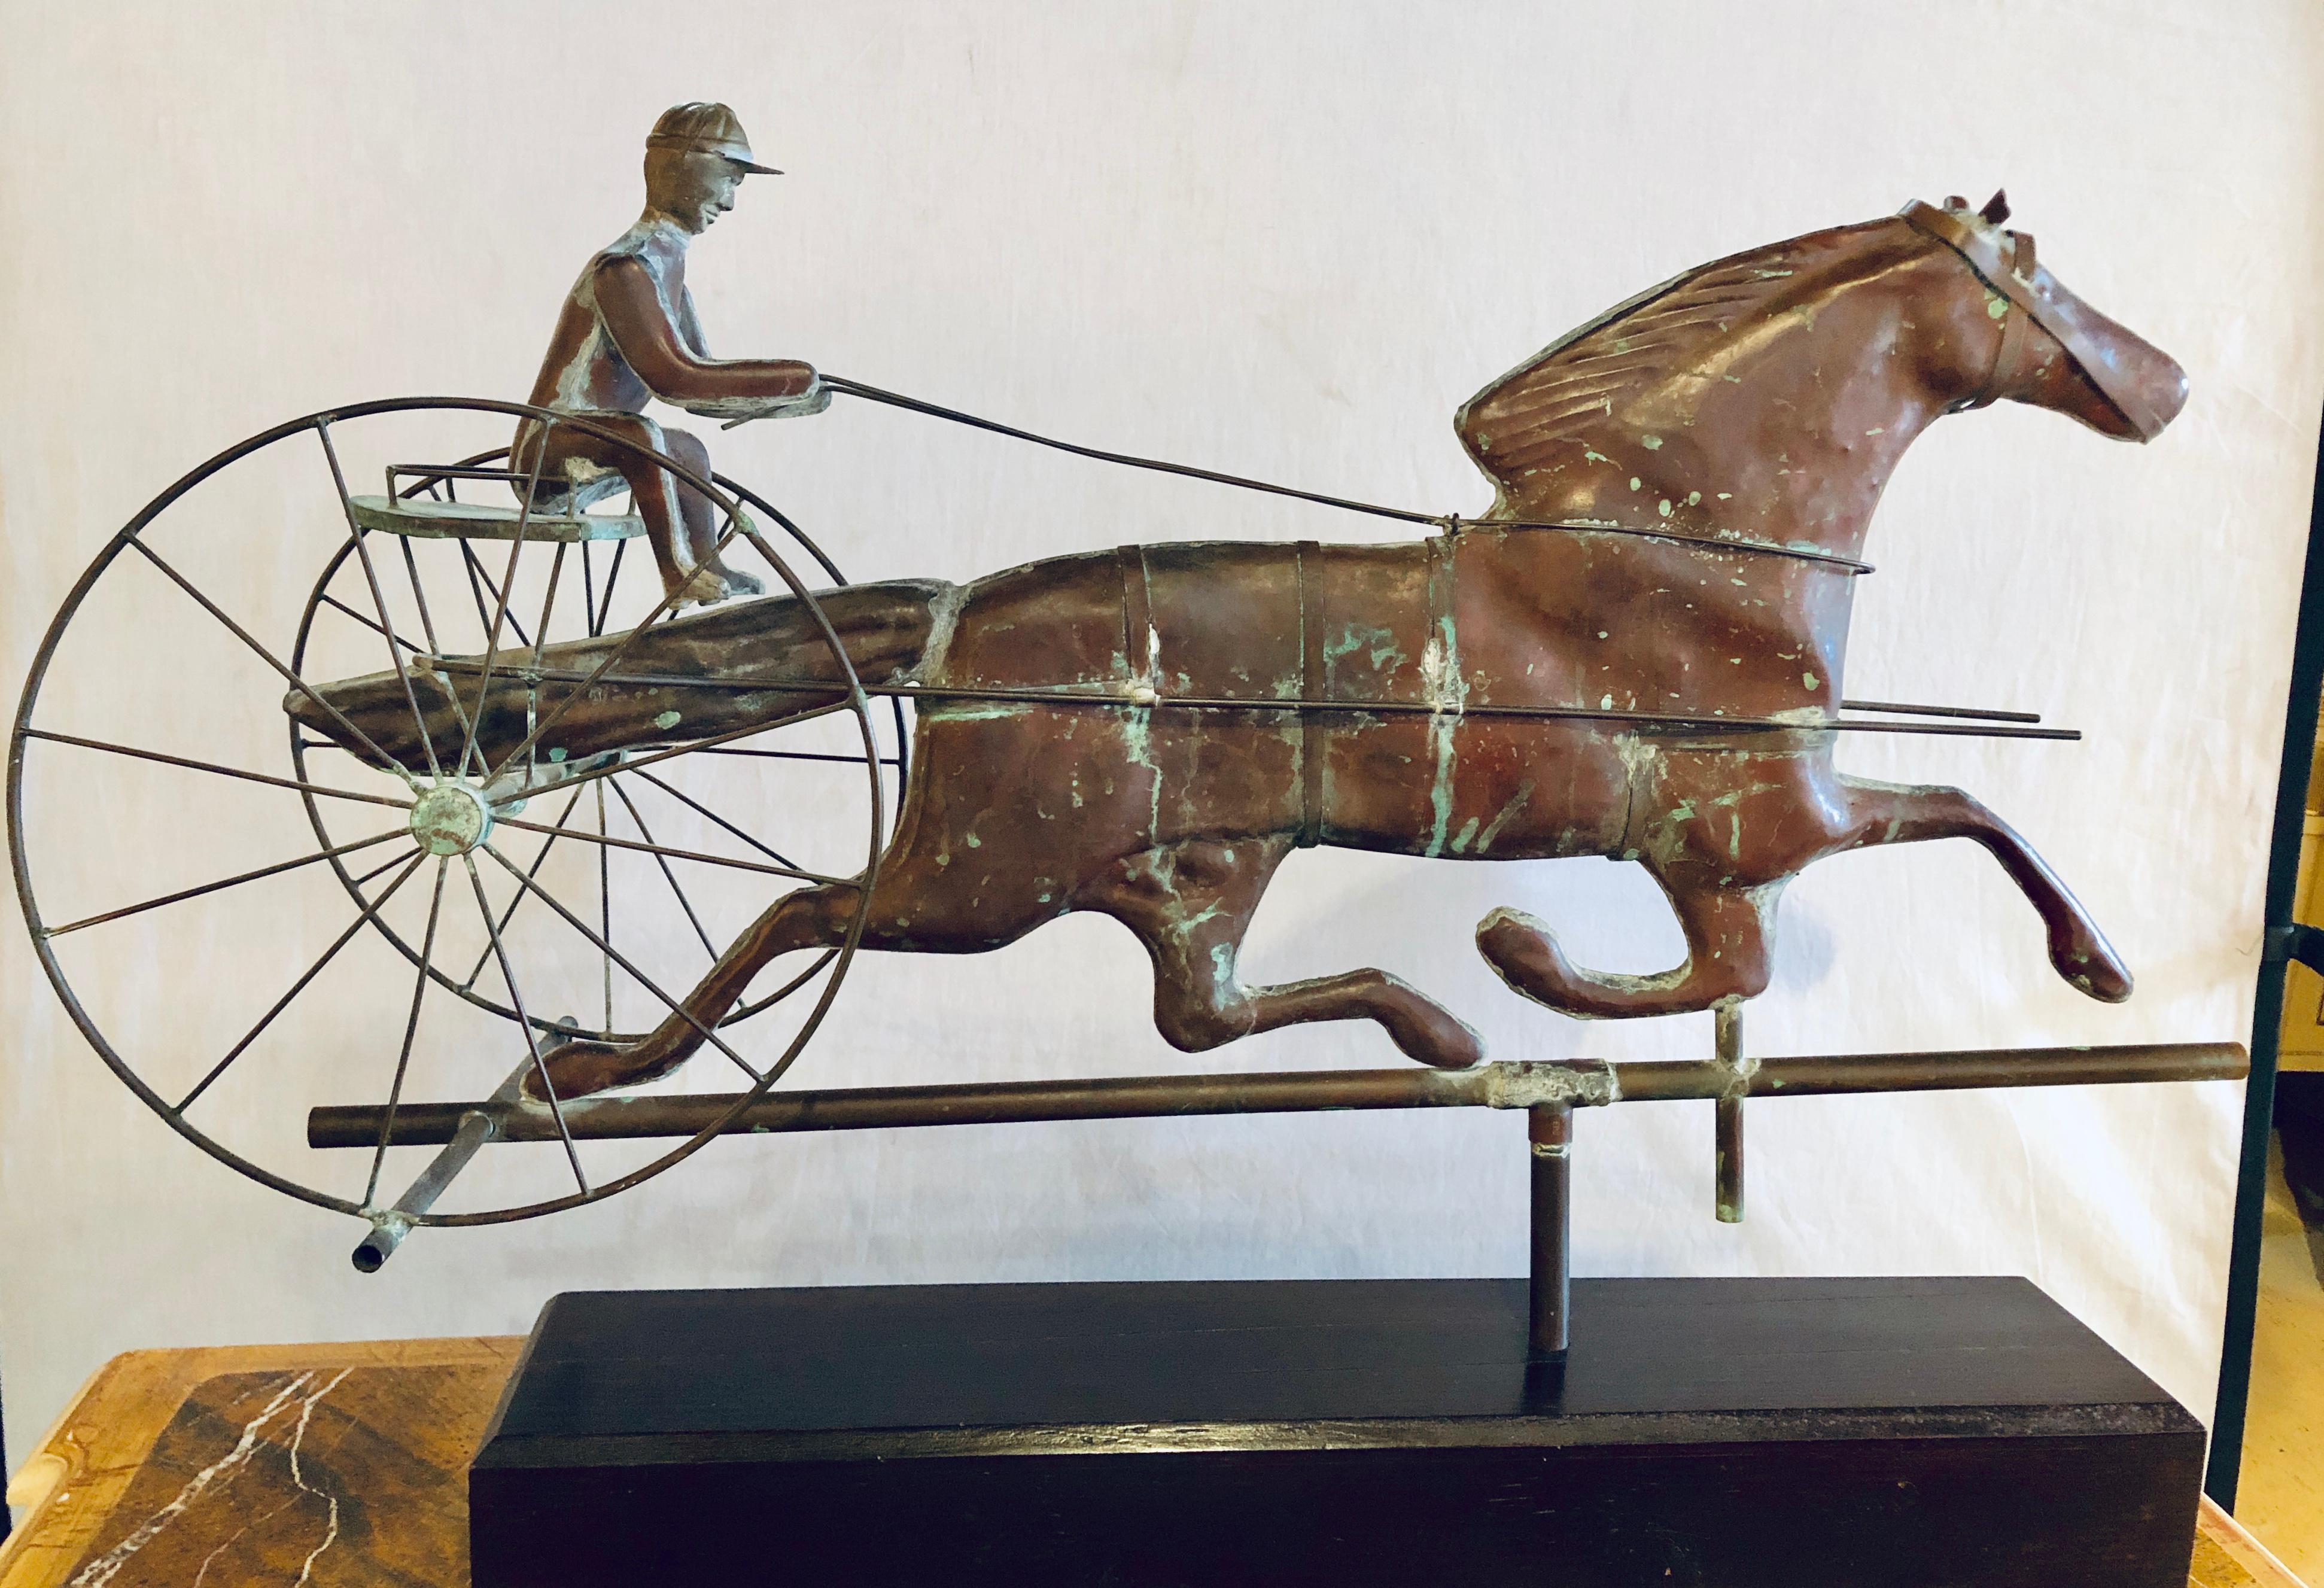 St. Julien with Sulky Molded Copper Weather Vane, attributed to J.W. Fiske, New York, last quarter 19th century, full-bodied molded sheet copper horse and driver vane with cast iron horse's head and driver's hands, sheet copper reins and seat,